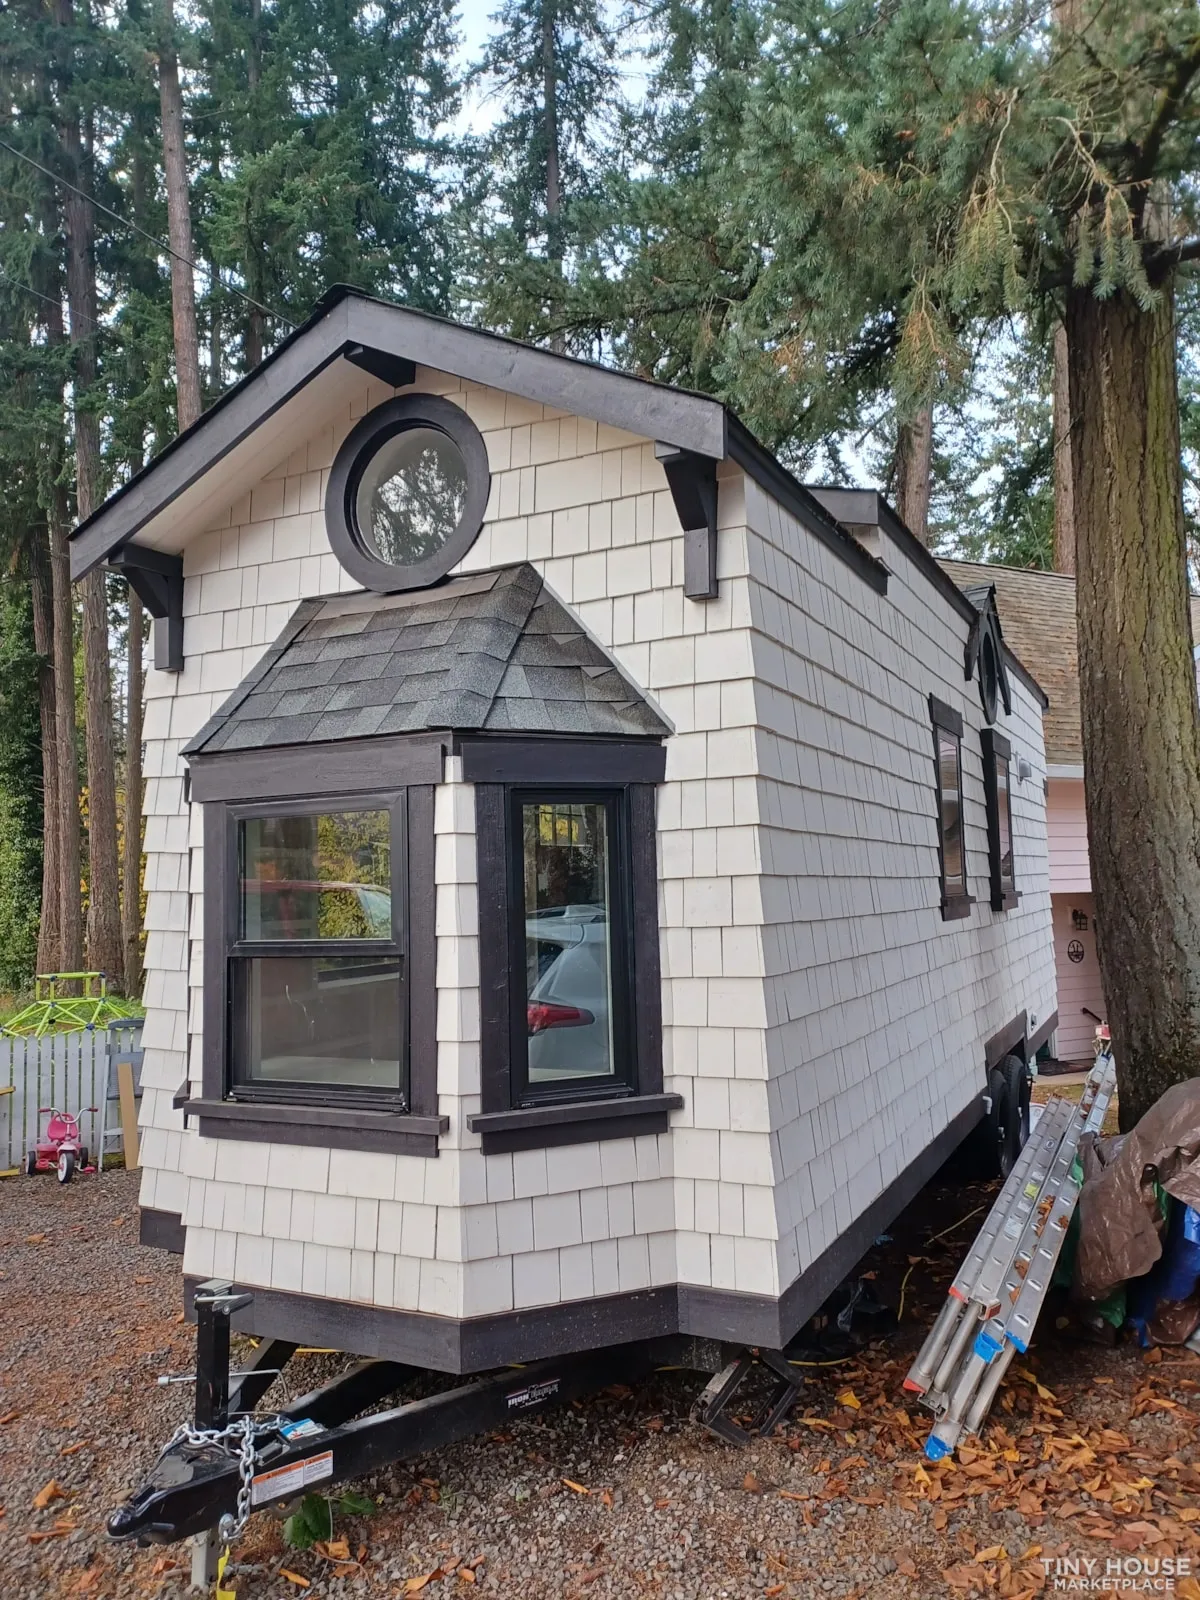 Fabulous flat-pack tiny homes delivered to your door